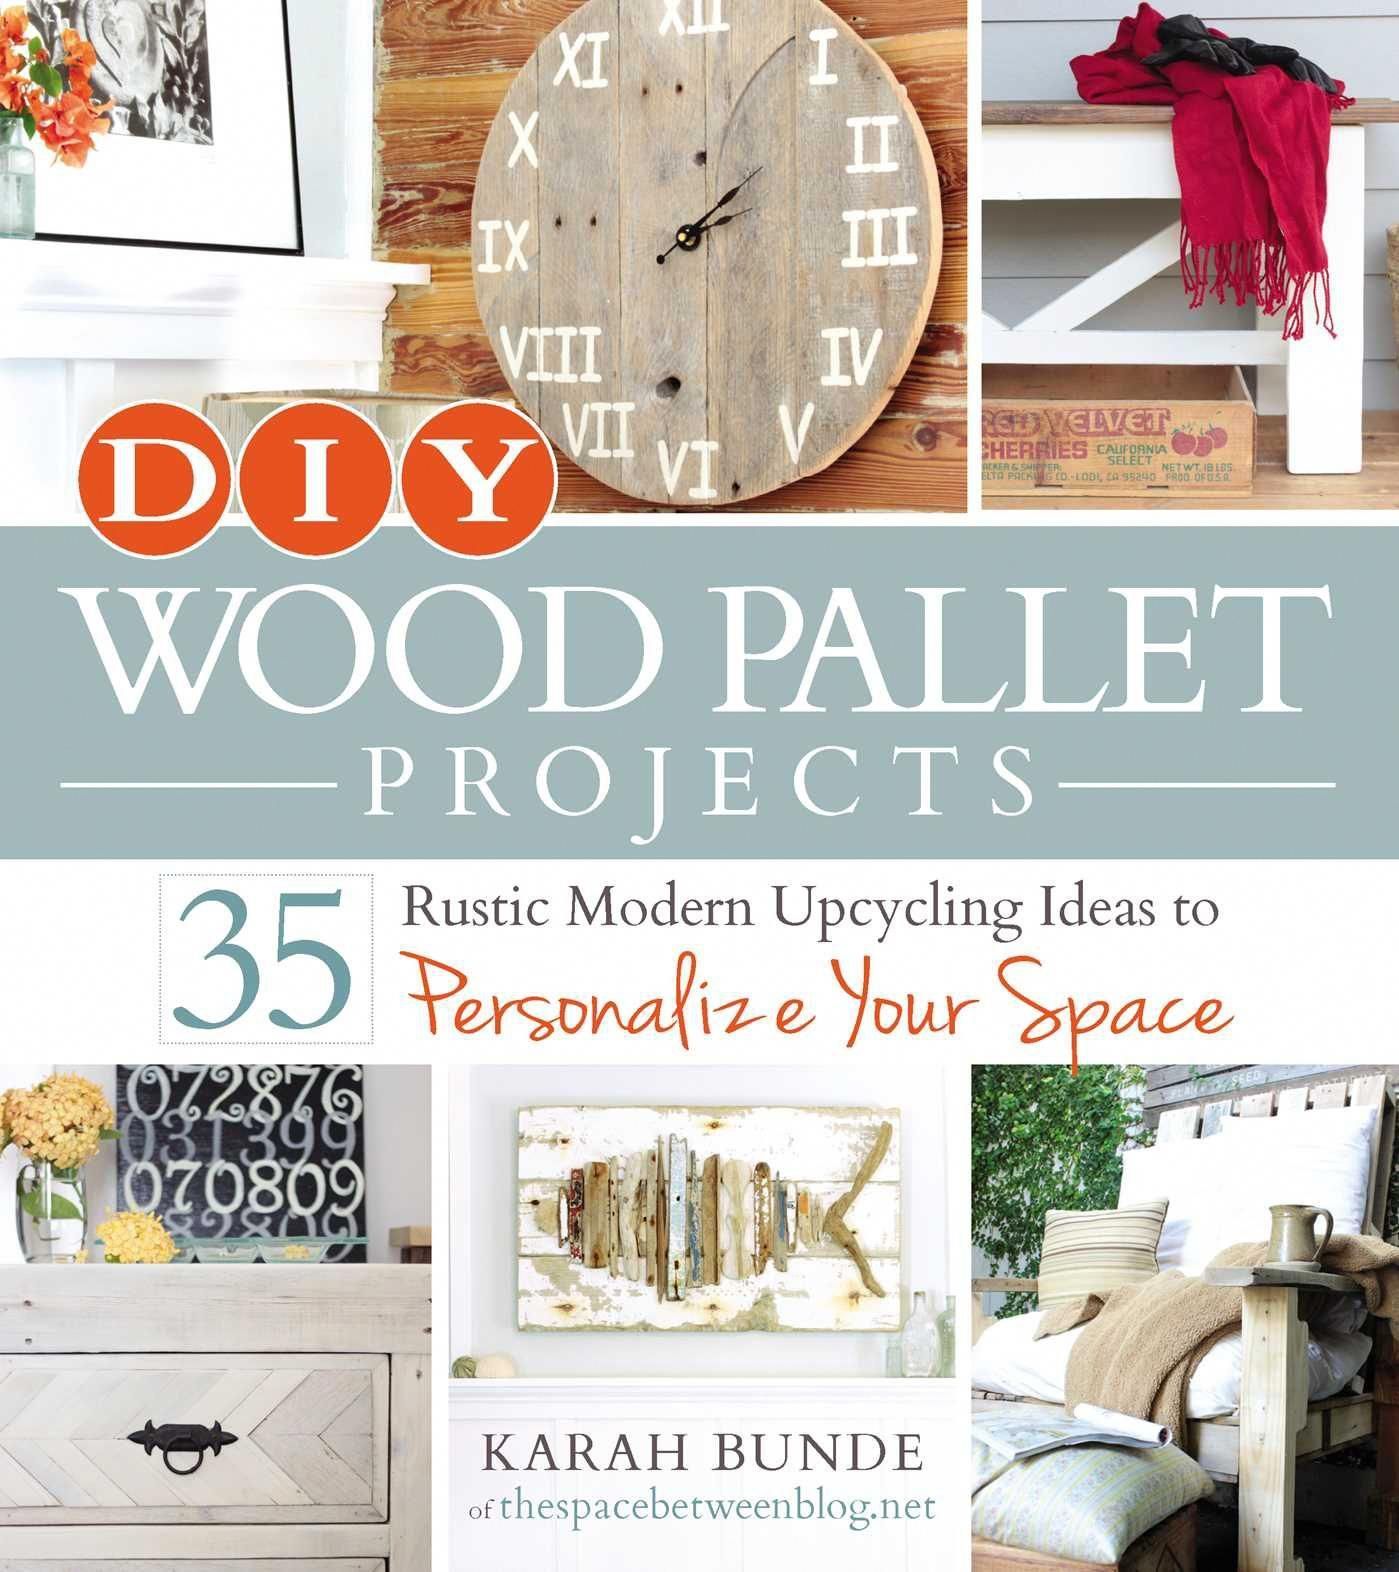 DIY Wood Pallet Projects : 35 Rustic Modern Upcycling Ideas to Personalize Your Space - Walmart.com - DIY Wood Pallet Projects : 35 Rustic Modern Upcycling Ideas to Personalize Your Space - Walmart.com -   18 diy projects for the home furniture ideas